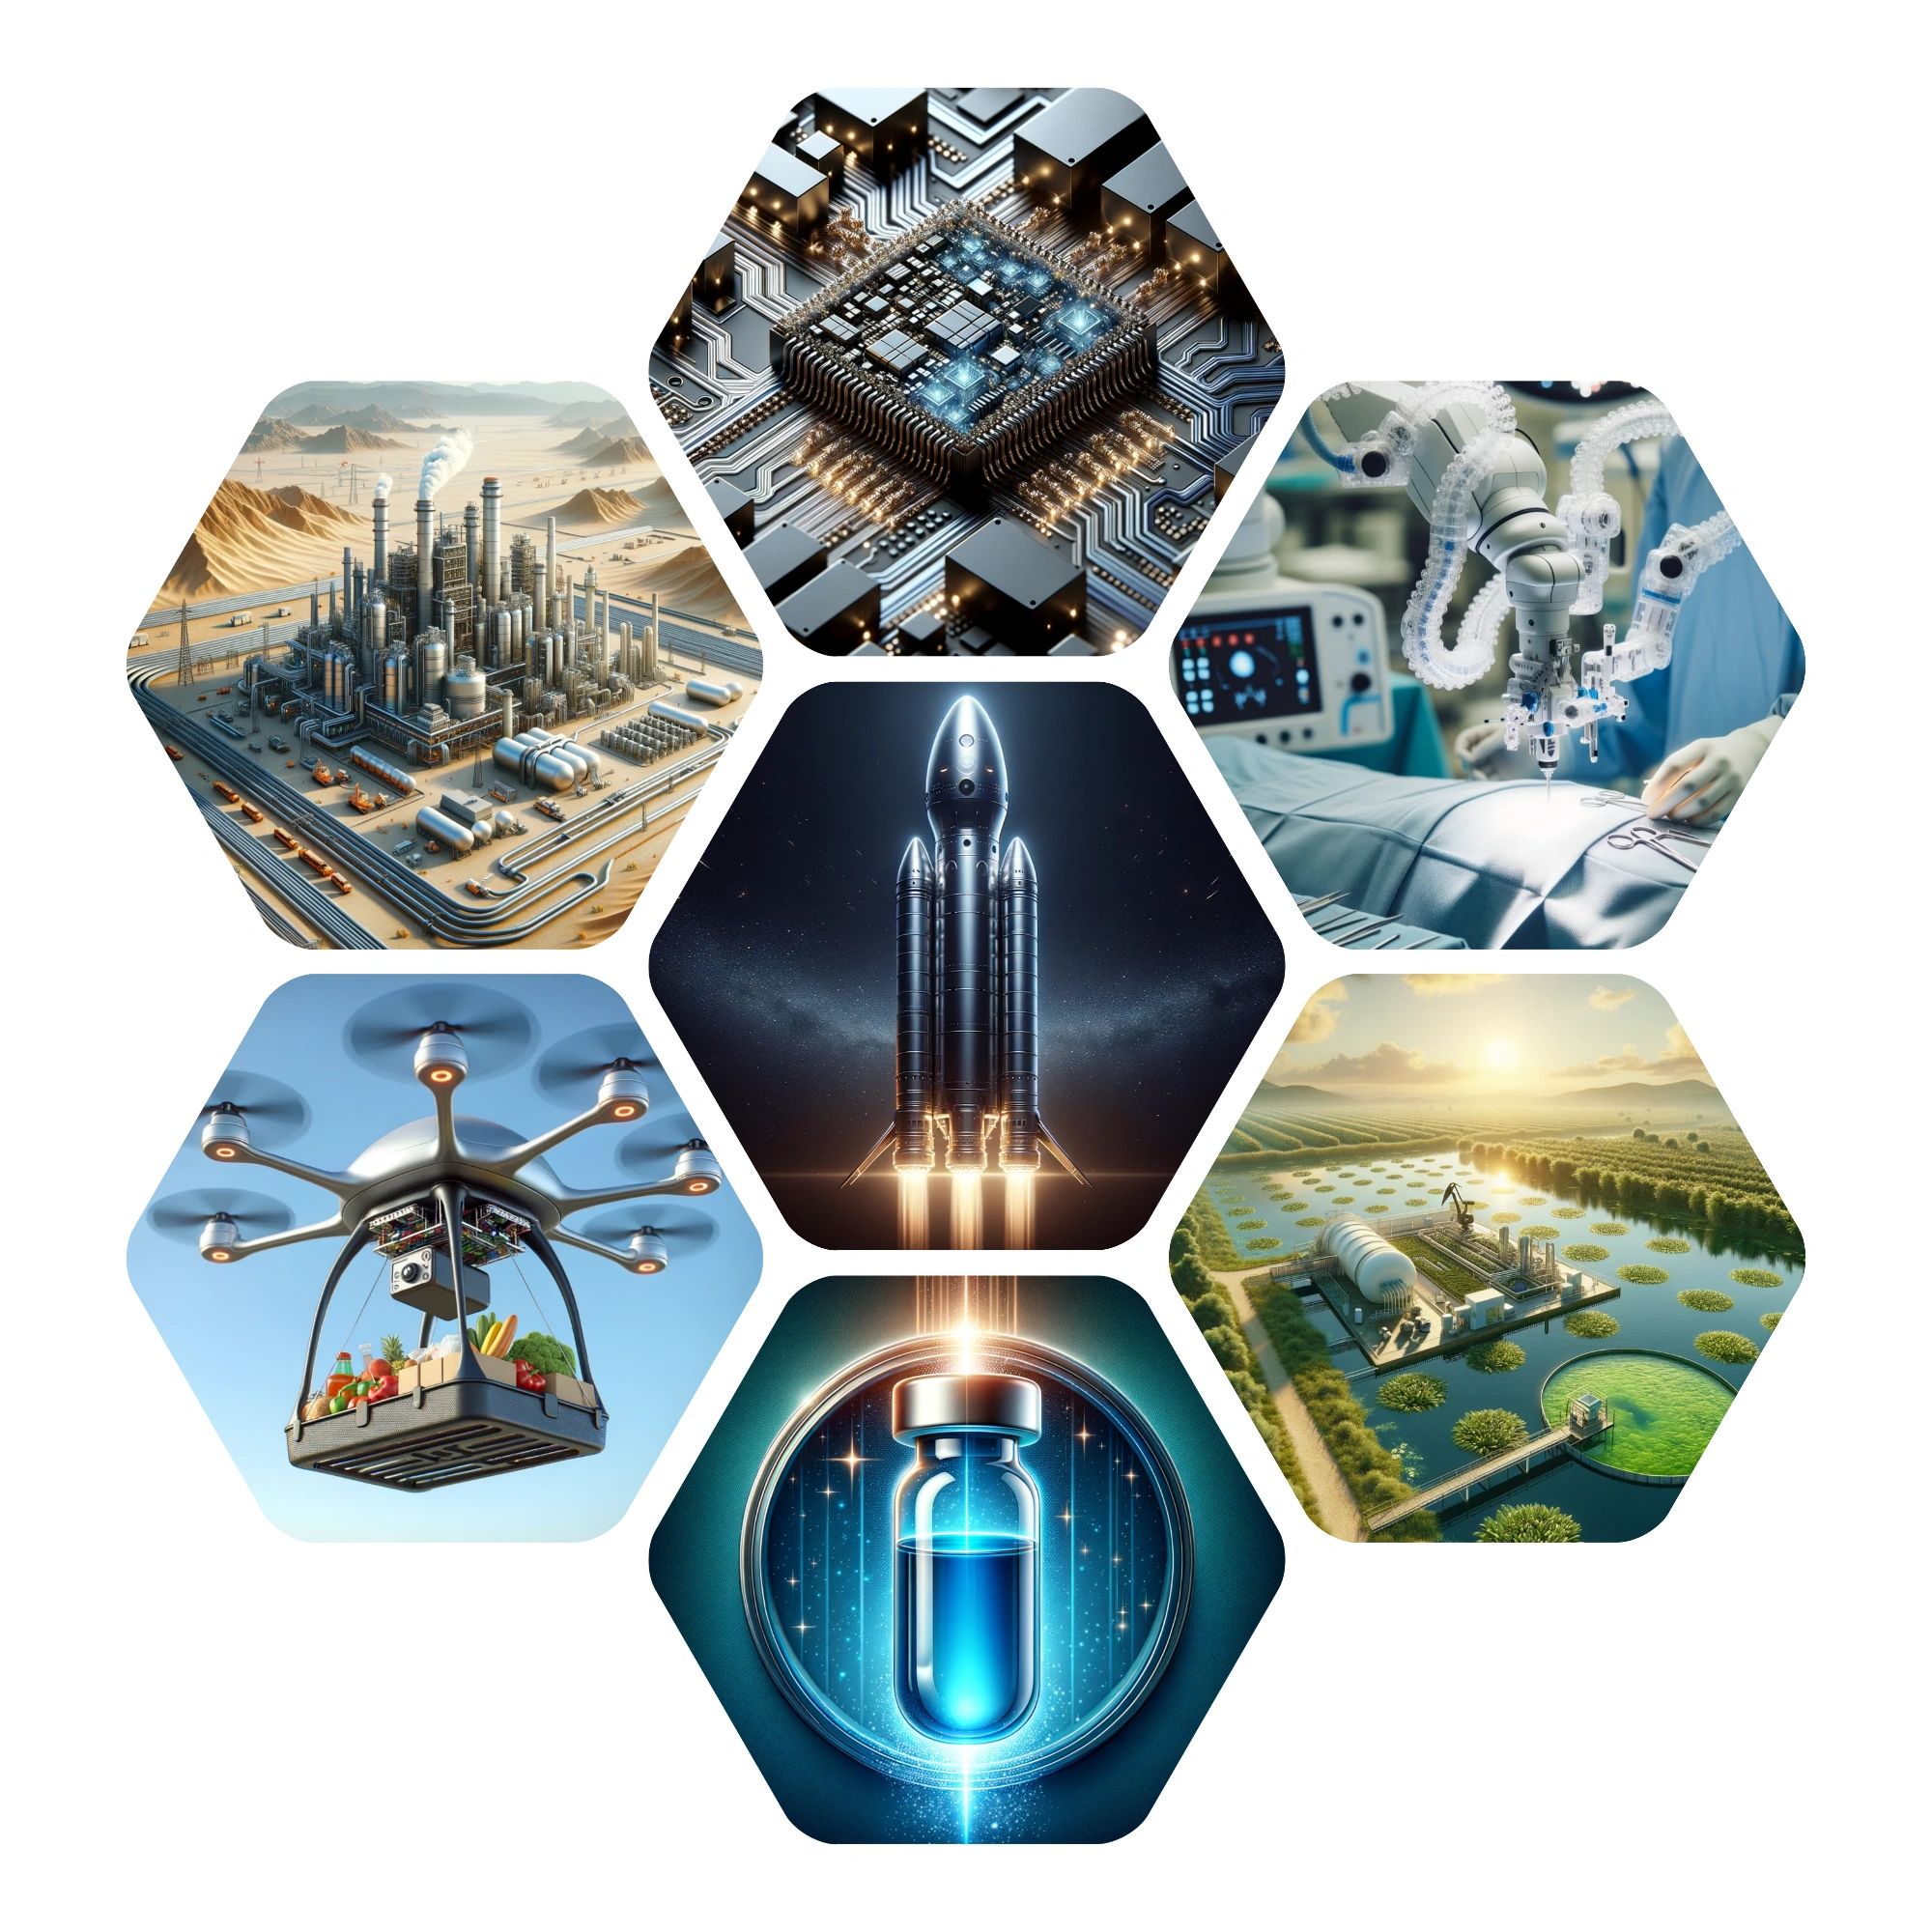 Deep-tech innovation collage including AI, robotics, biotech, clean energy and space exploration